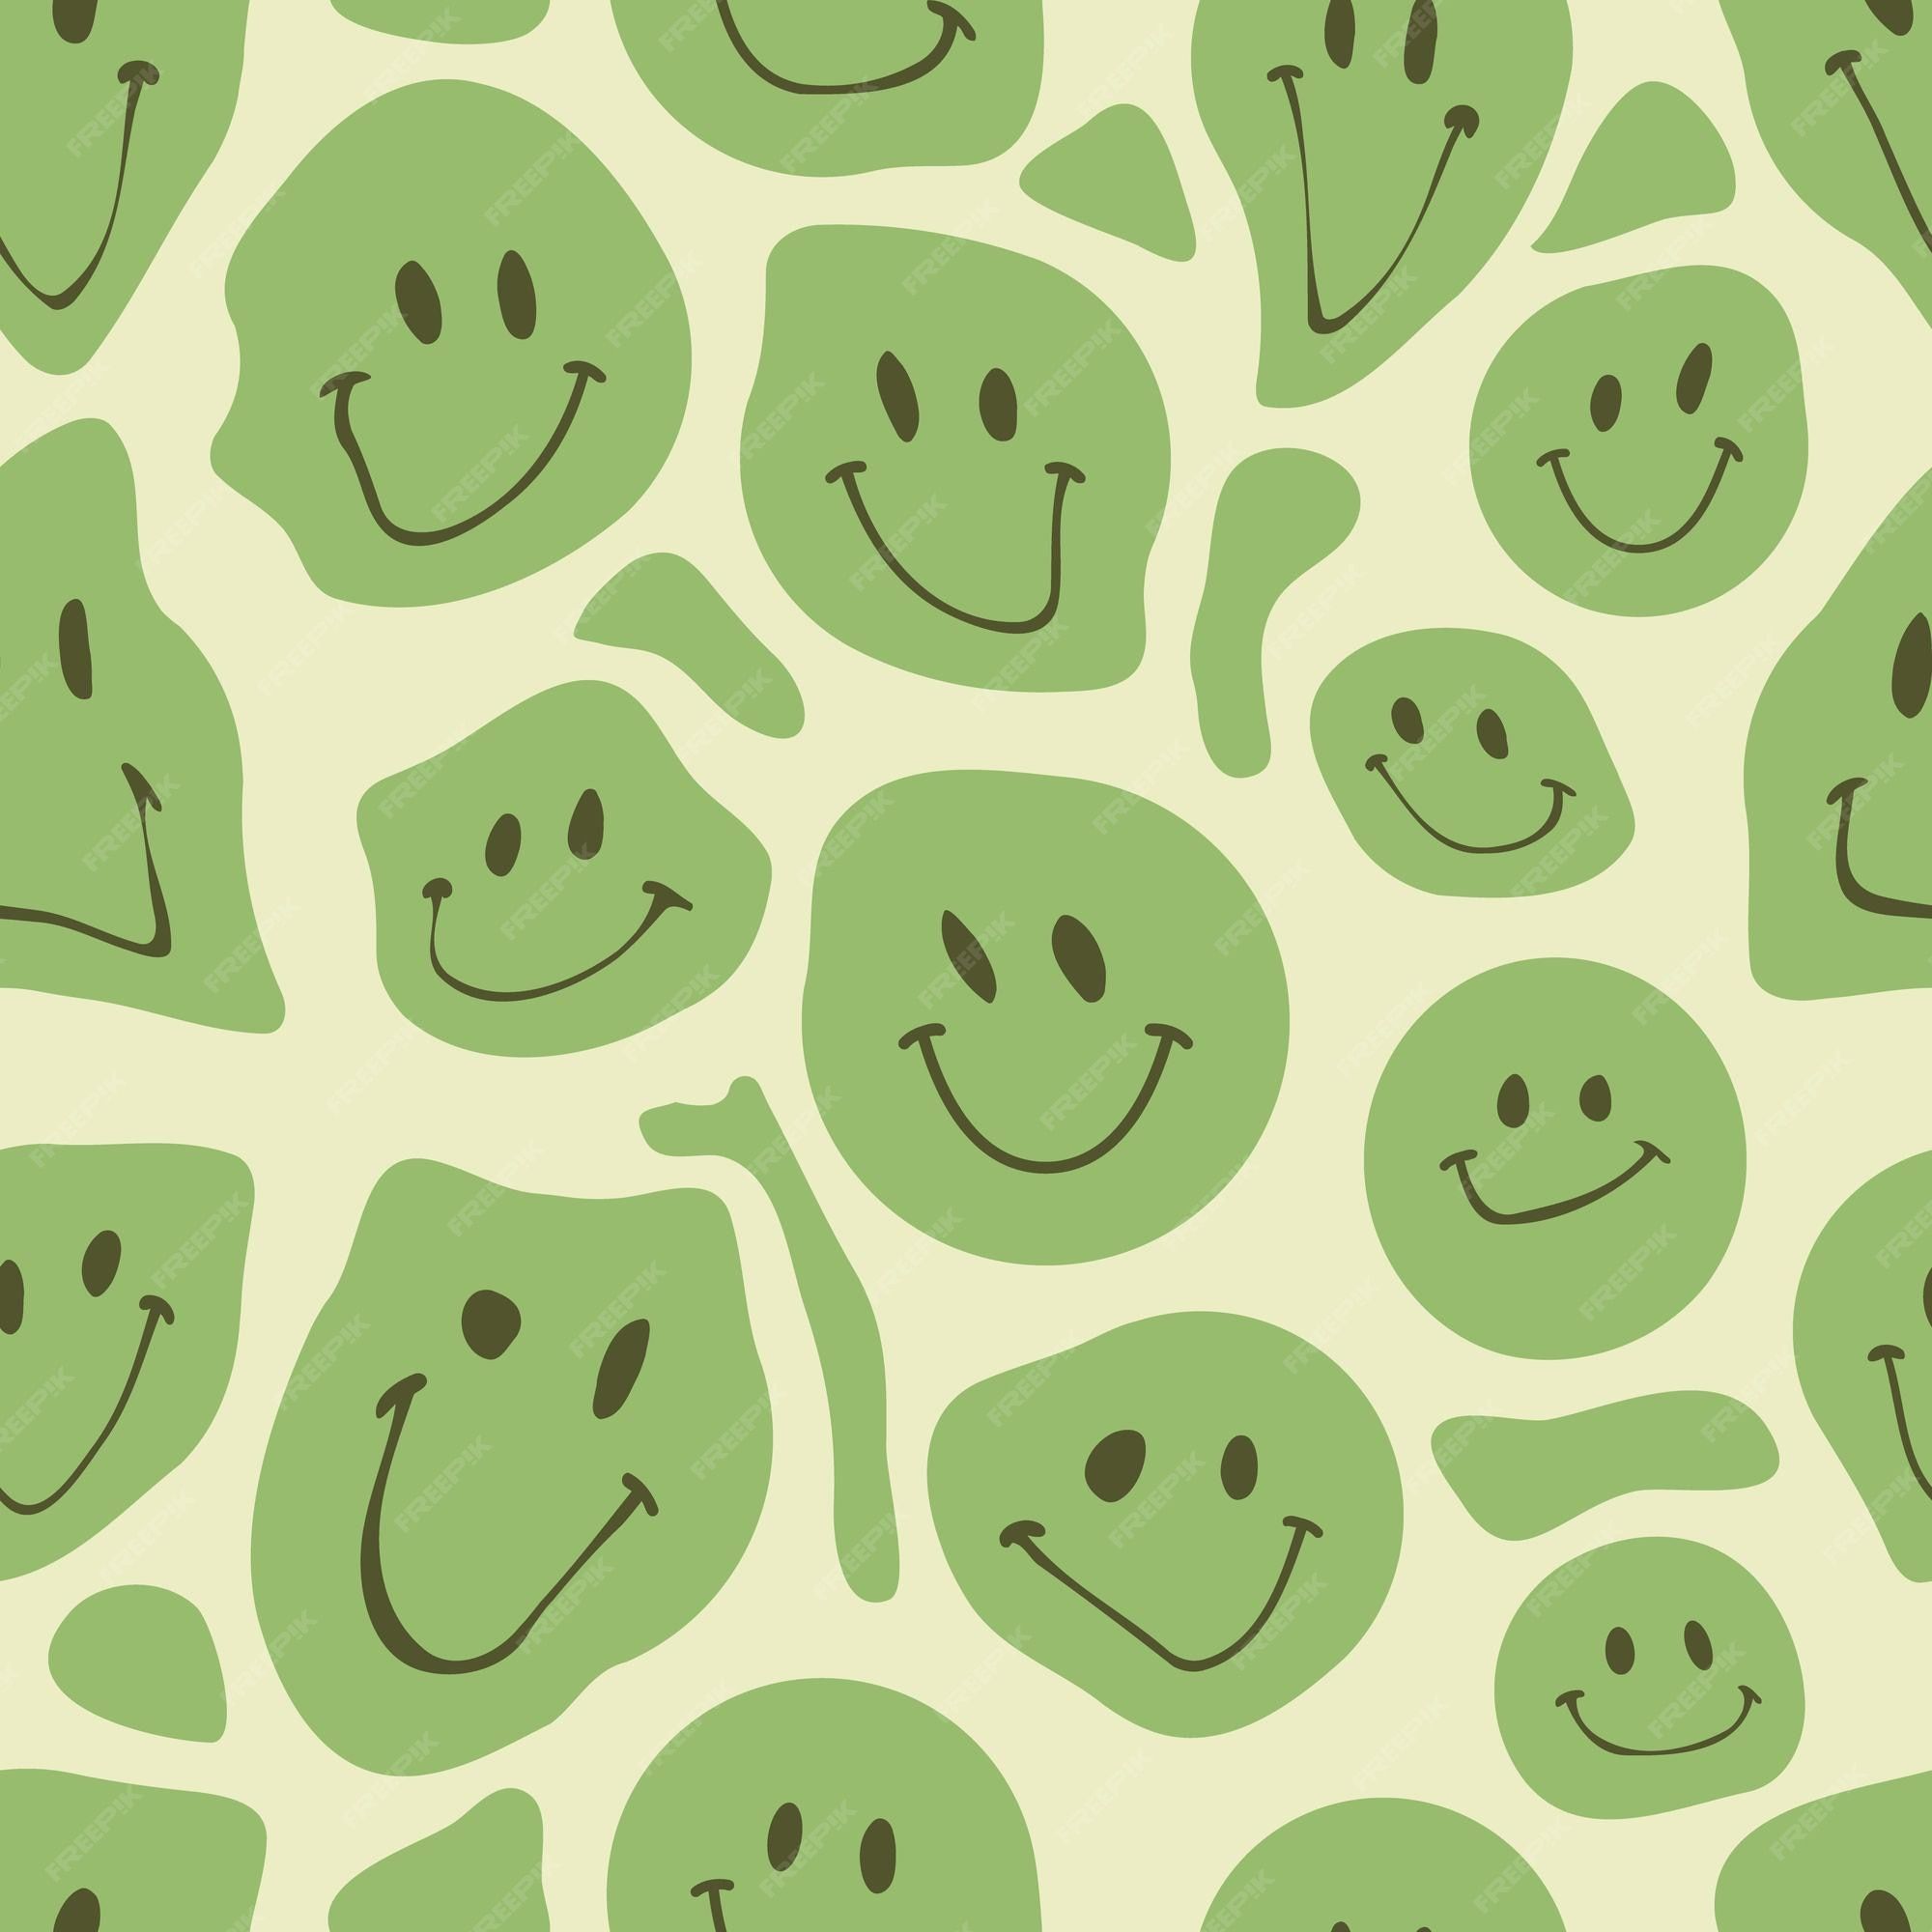 Premium Vector. Dripping emoji smiles seamless pattern distorted smiling face psychedelic wallpaper vector